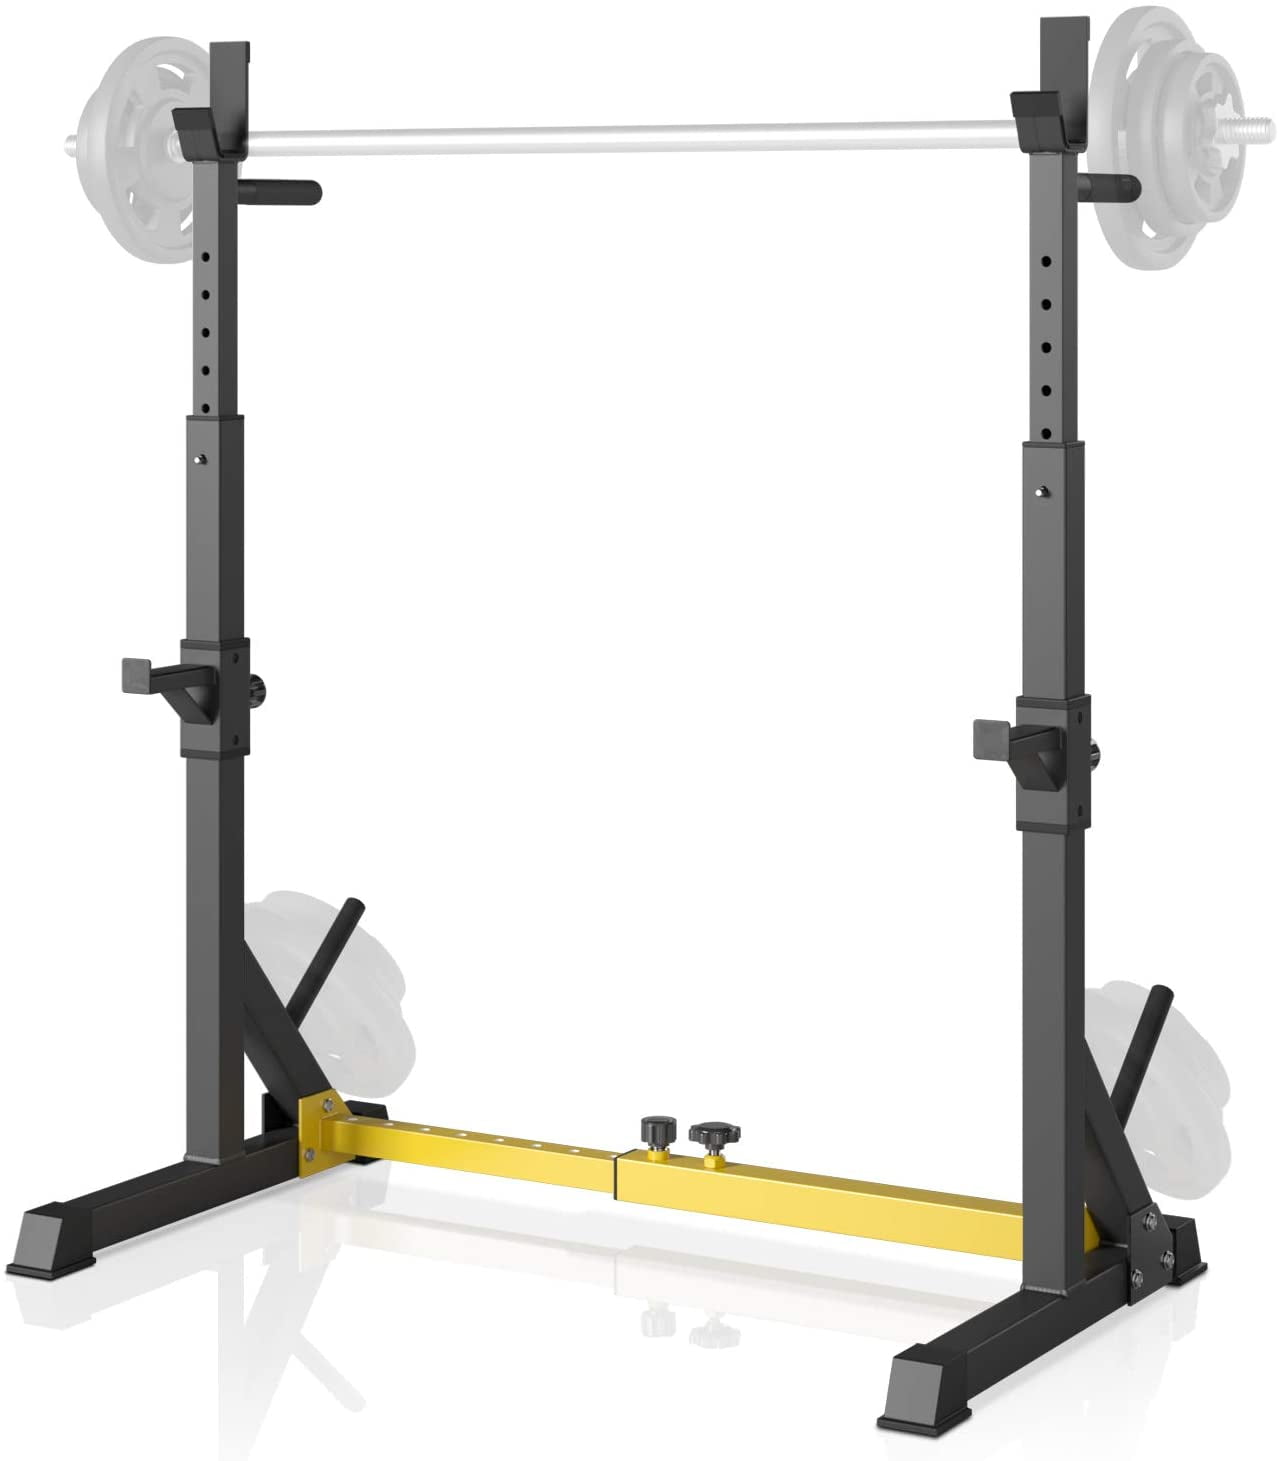 Adjustable Barbell Stand Squat Rack Weight Lifting Bench Press Workout Home Gym 